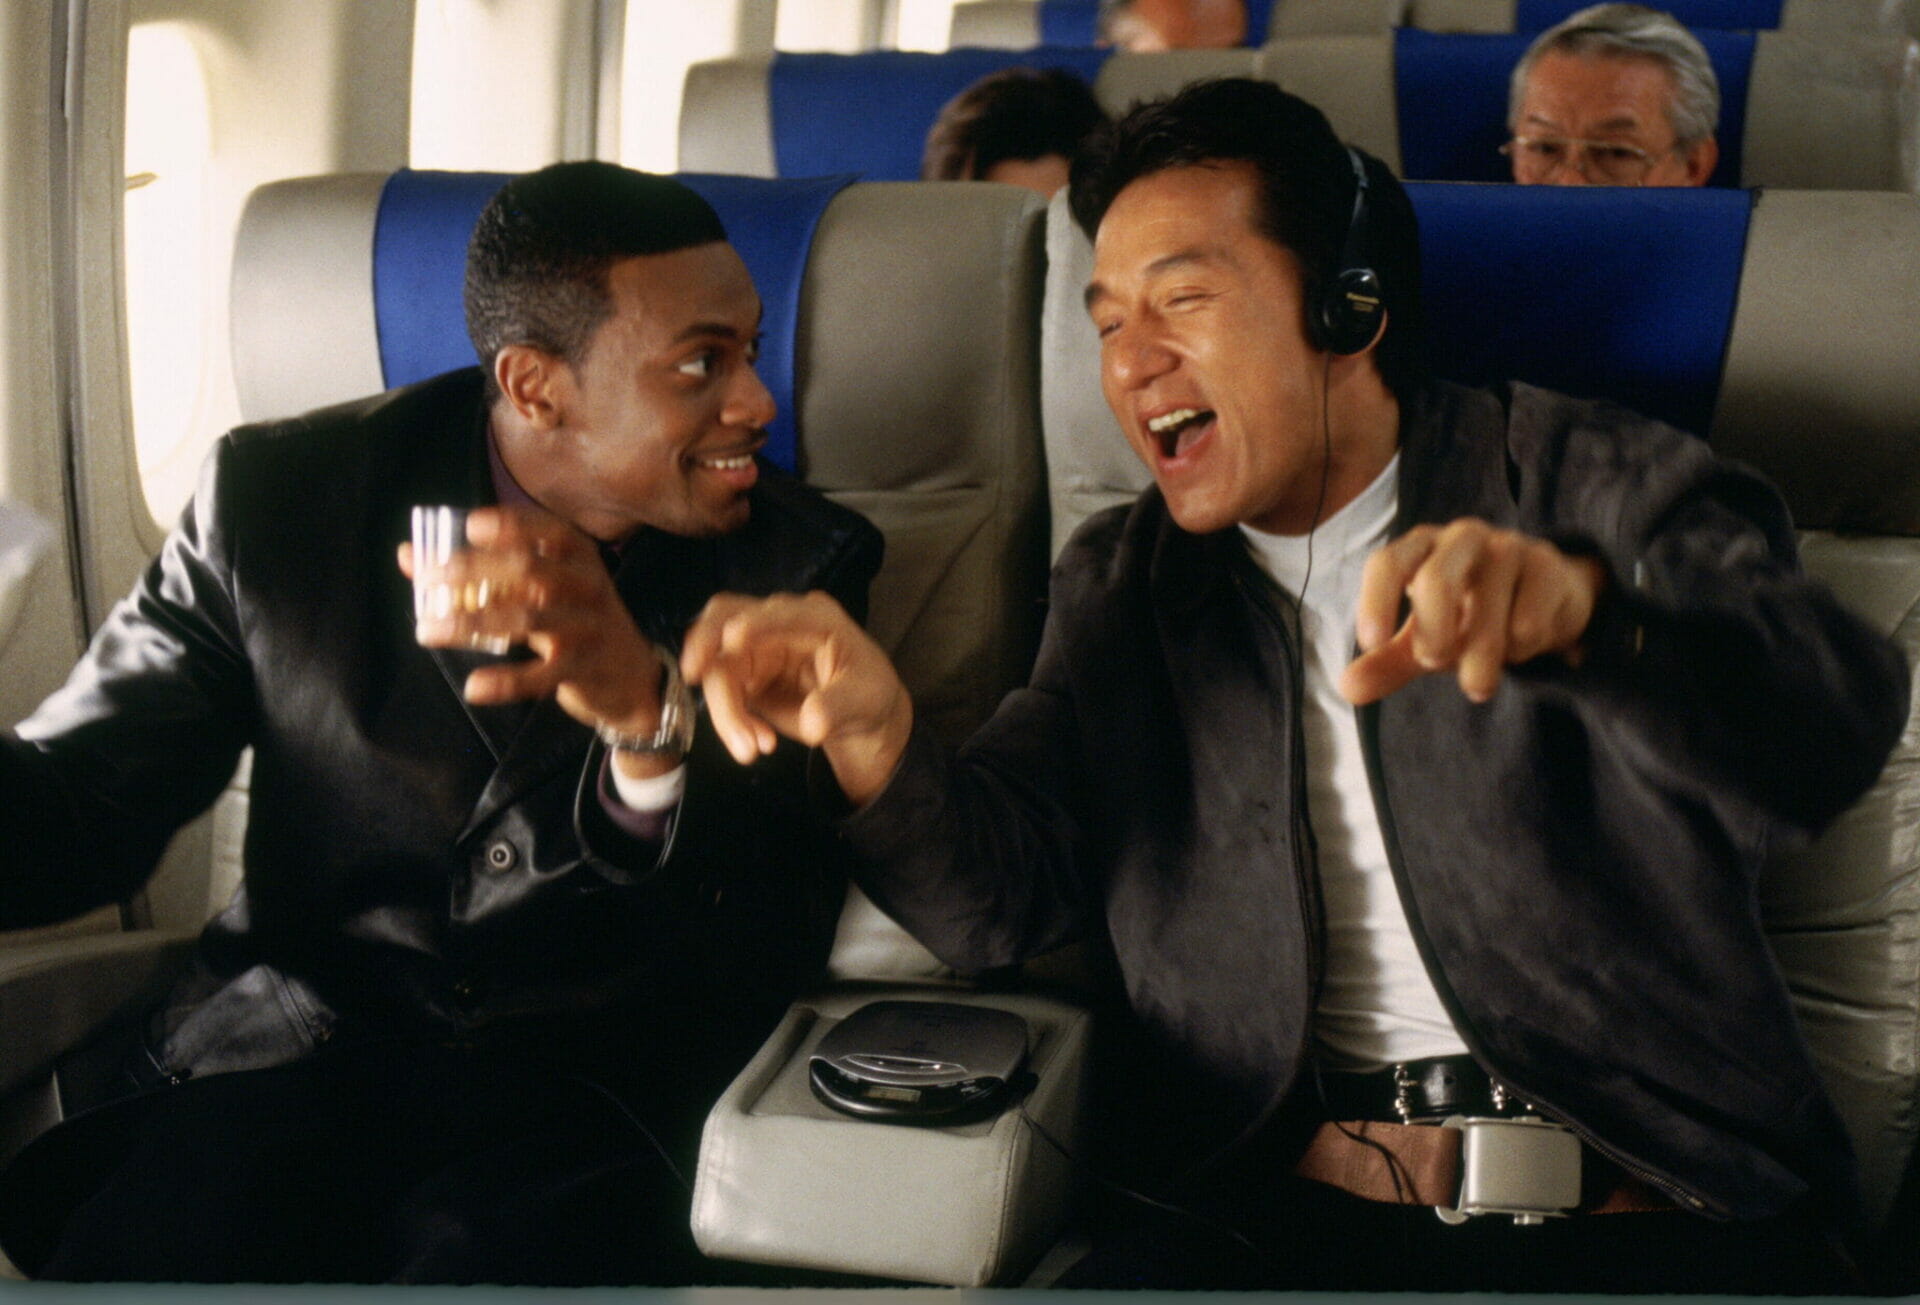 Action comedy movies: Rush Hour (1988)